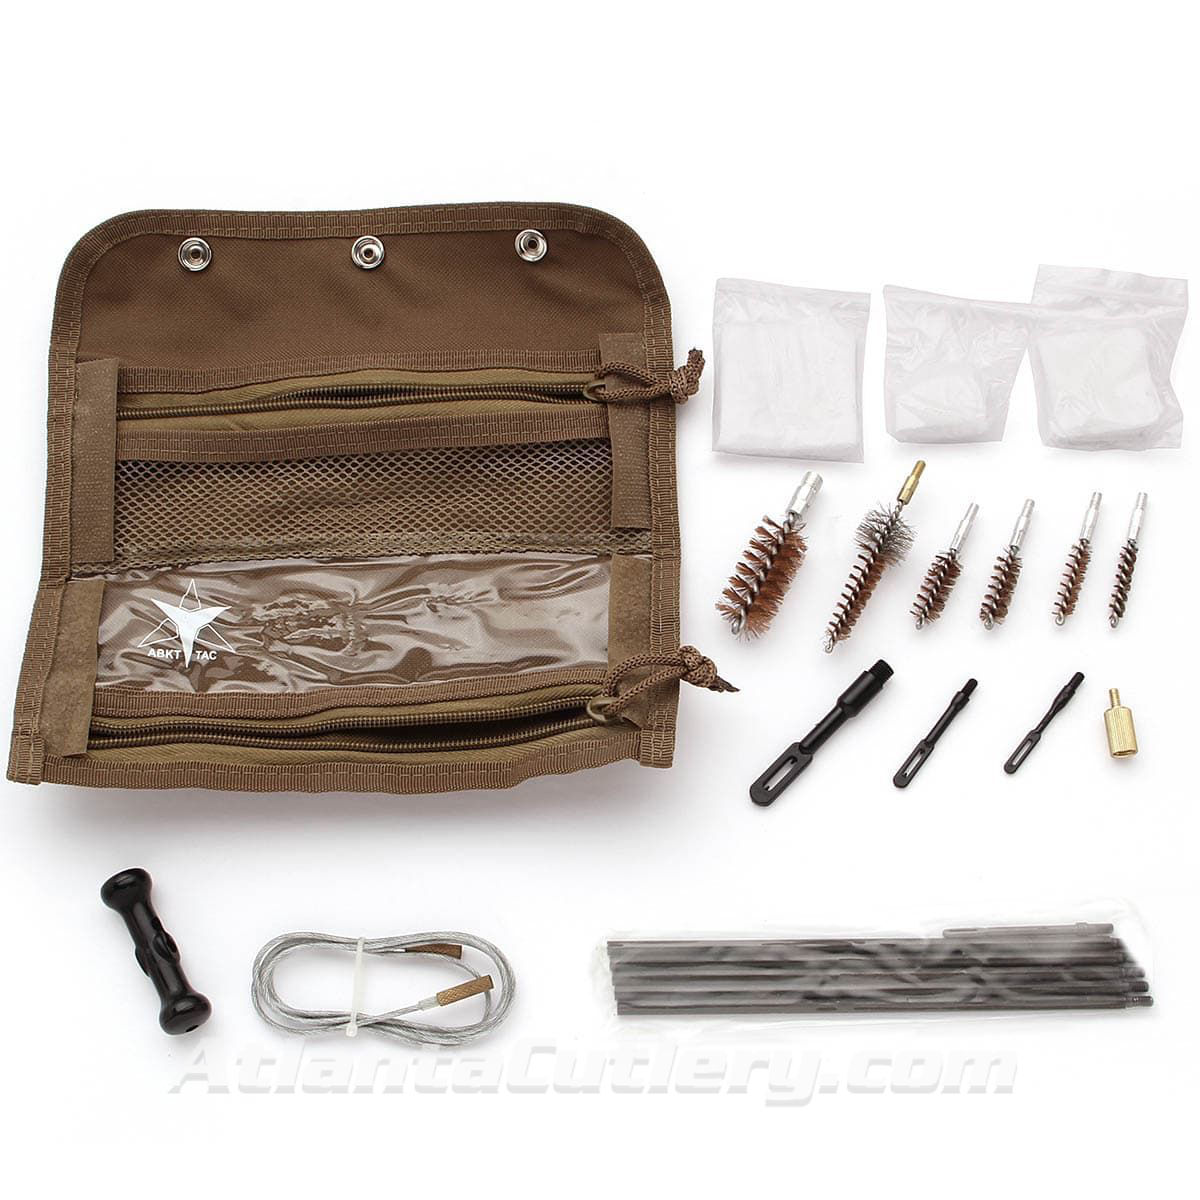 Portable Tactical Gun Care Kit with brass bore brushes, iron rods, patch pullers and cotton patches